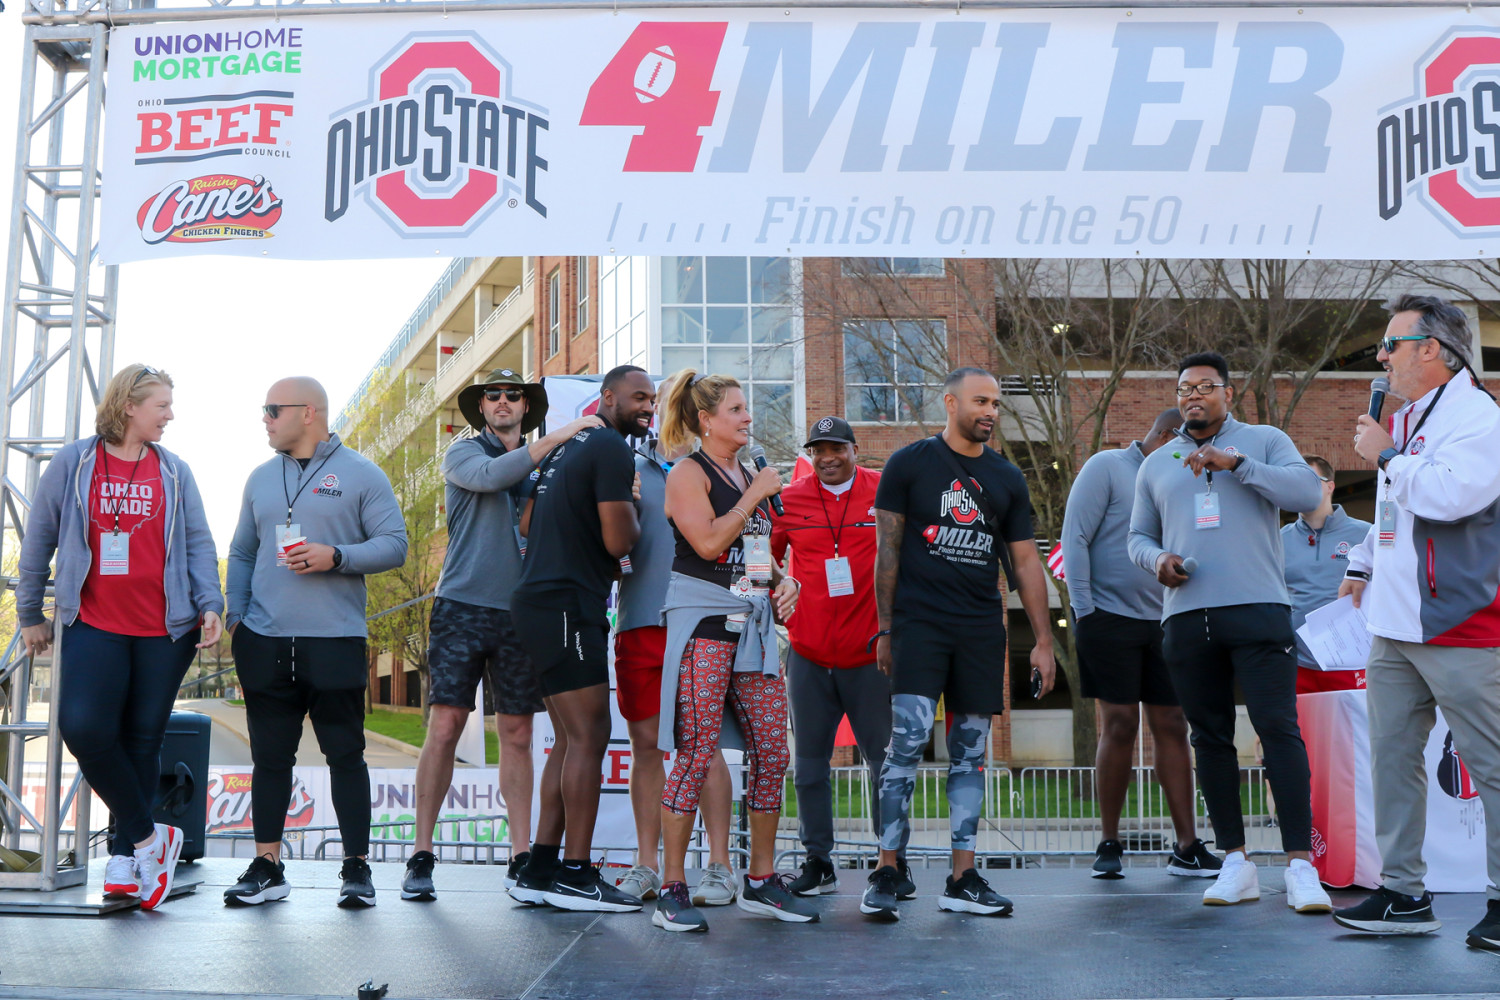 The OSU 4 Miler, largest 4 miler in the U.S.A. right here at Ohio Stadium